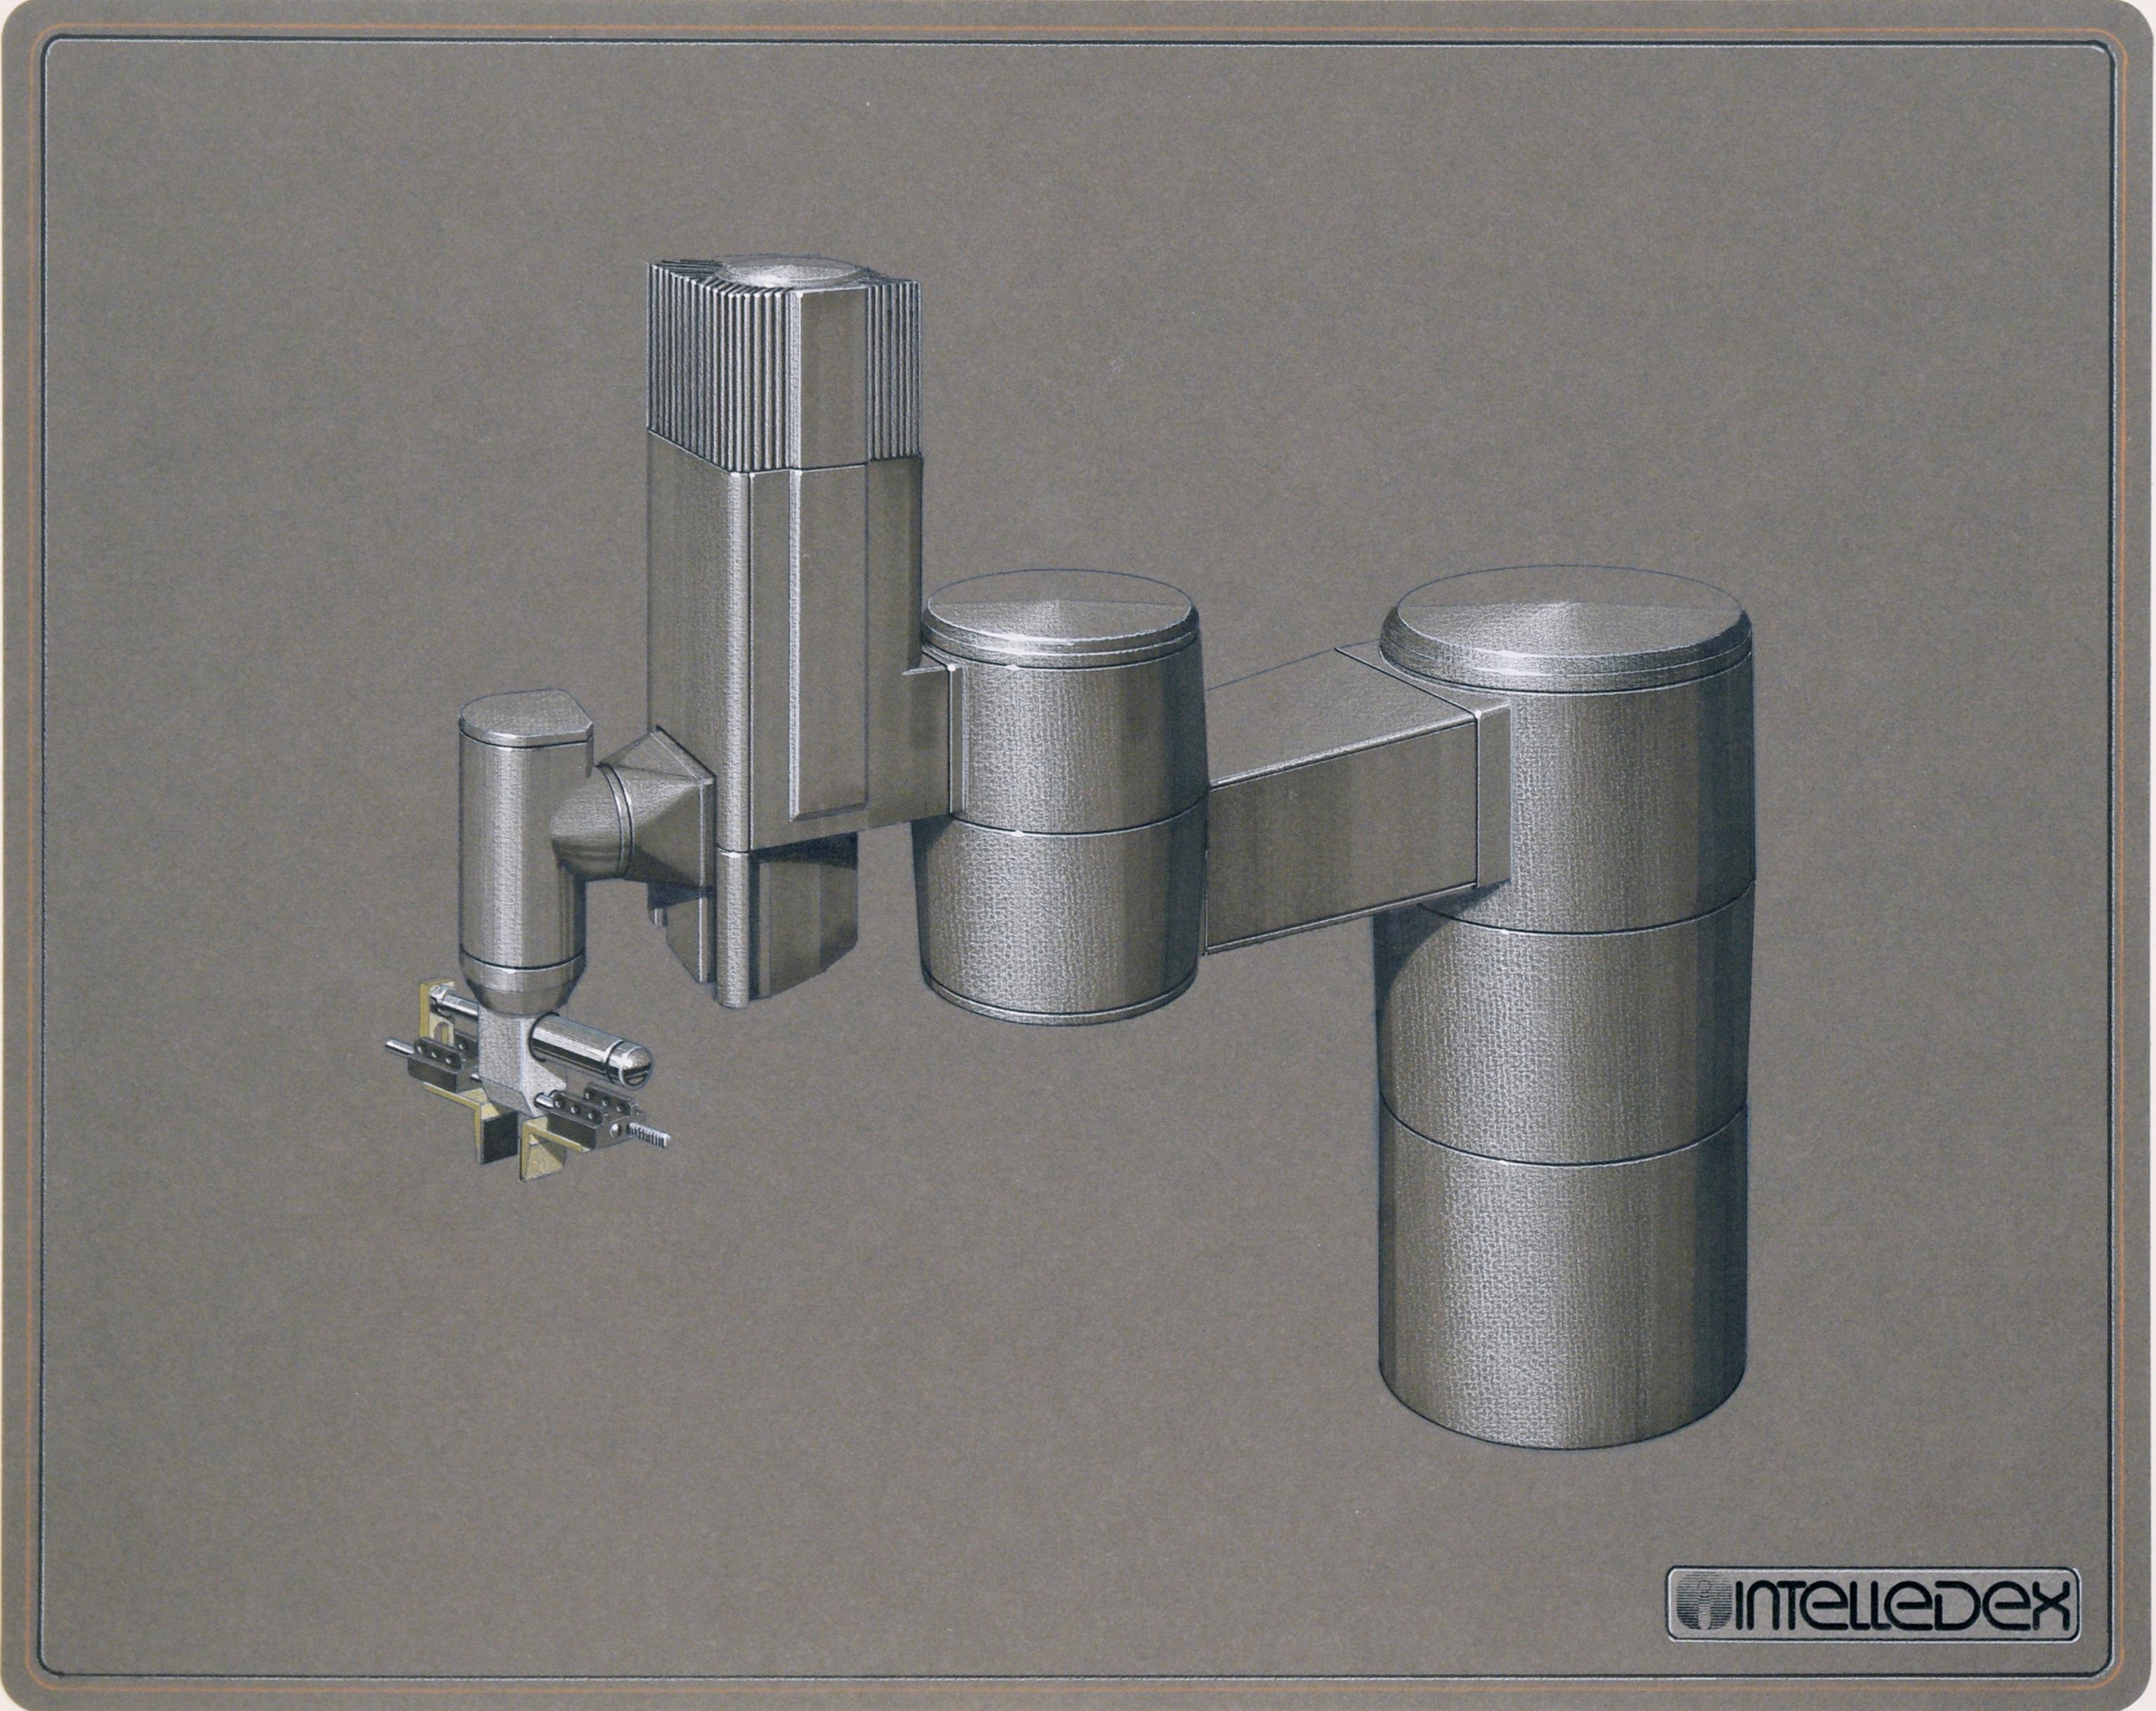 Intelledex Industrial Machinery Design Drawing in Pencil and Ink on Paper - Art by Edward T. Liljenwall